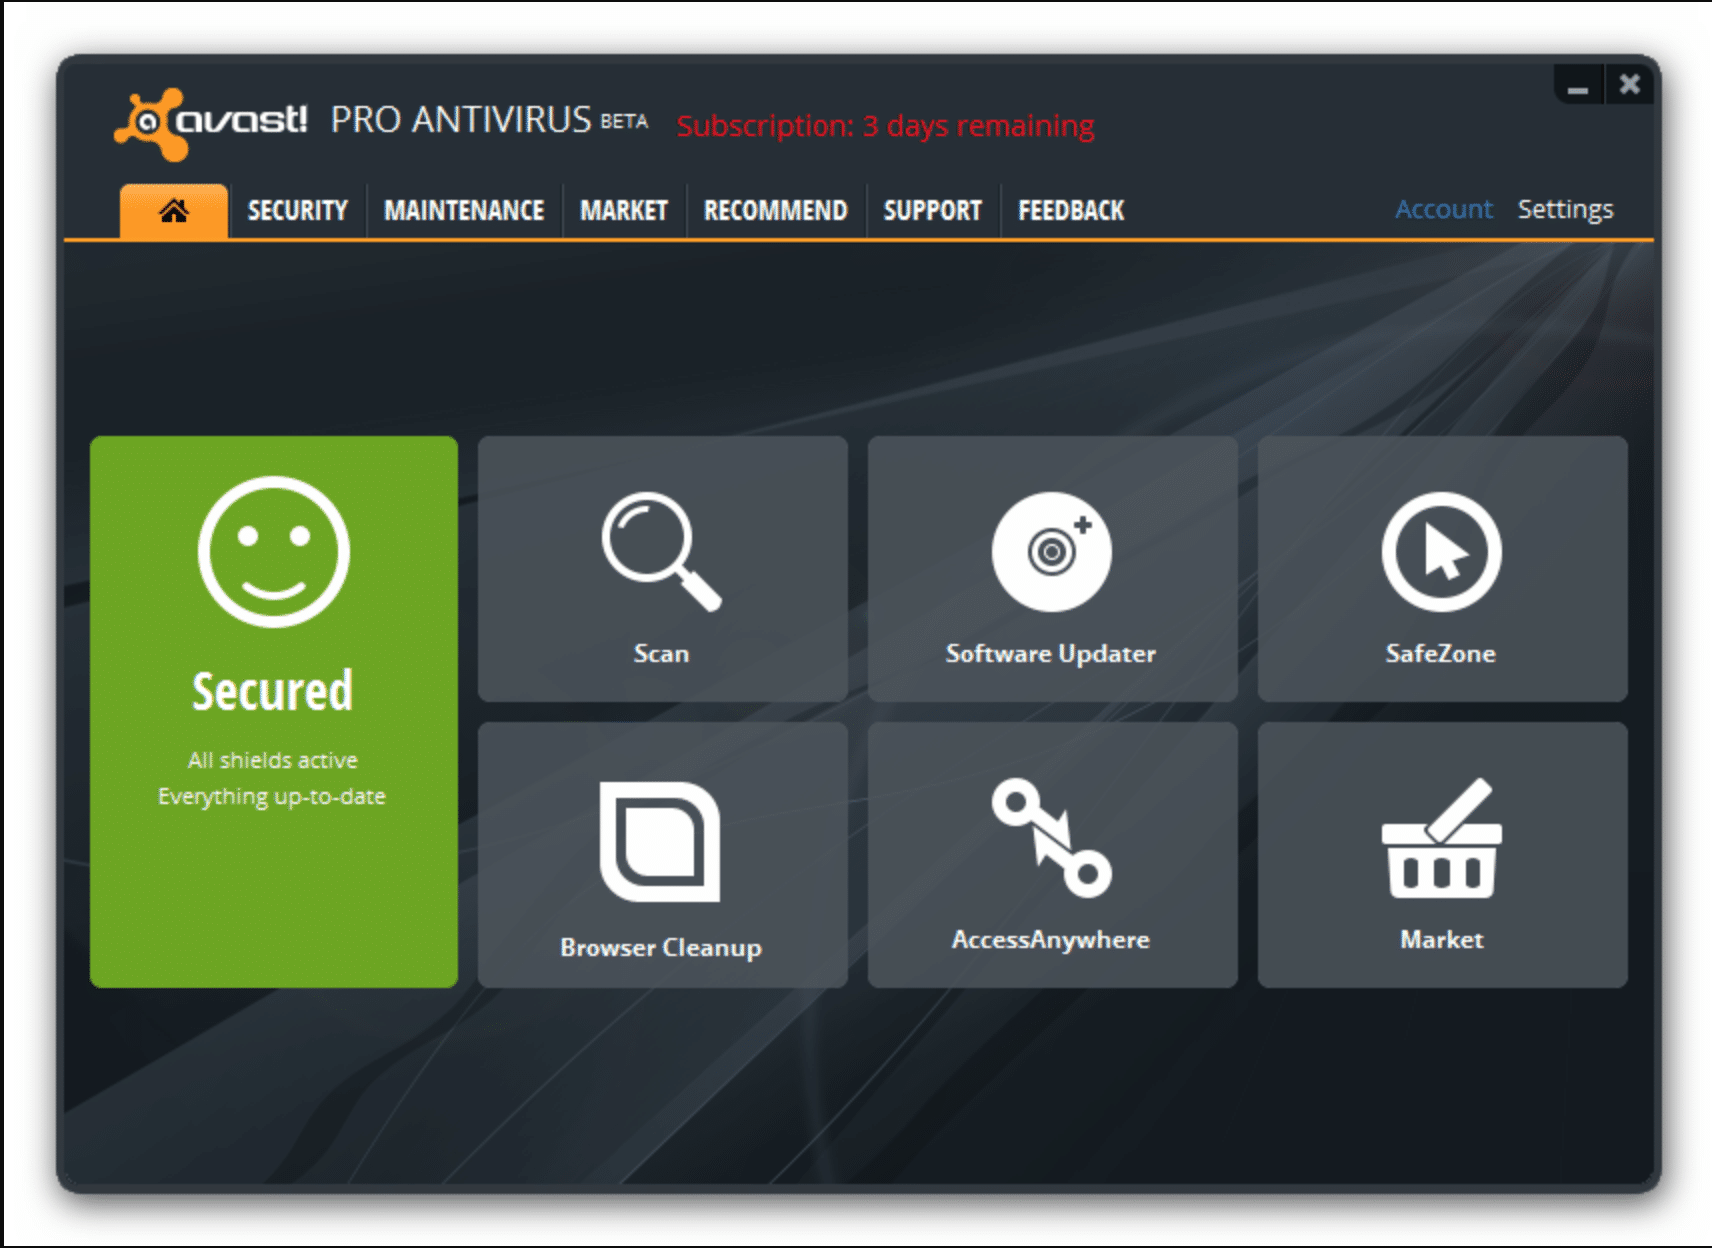 Avast user interface showing icons